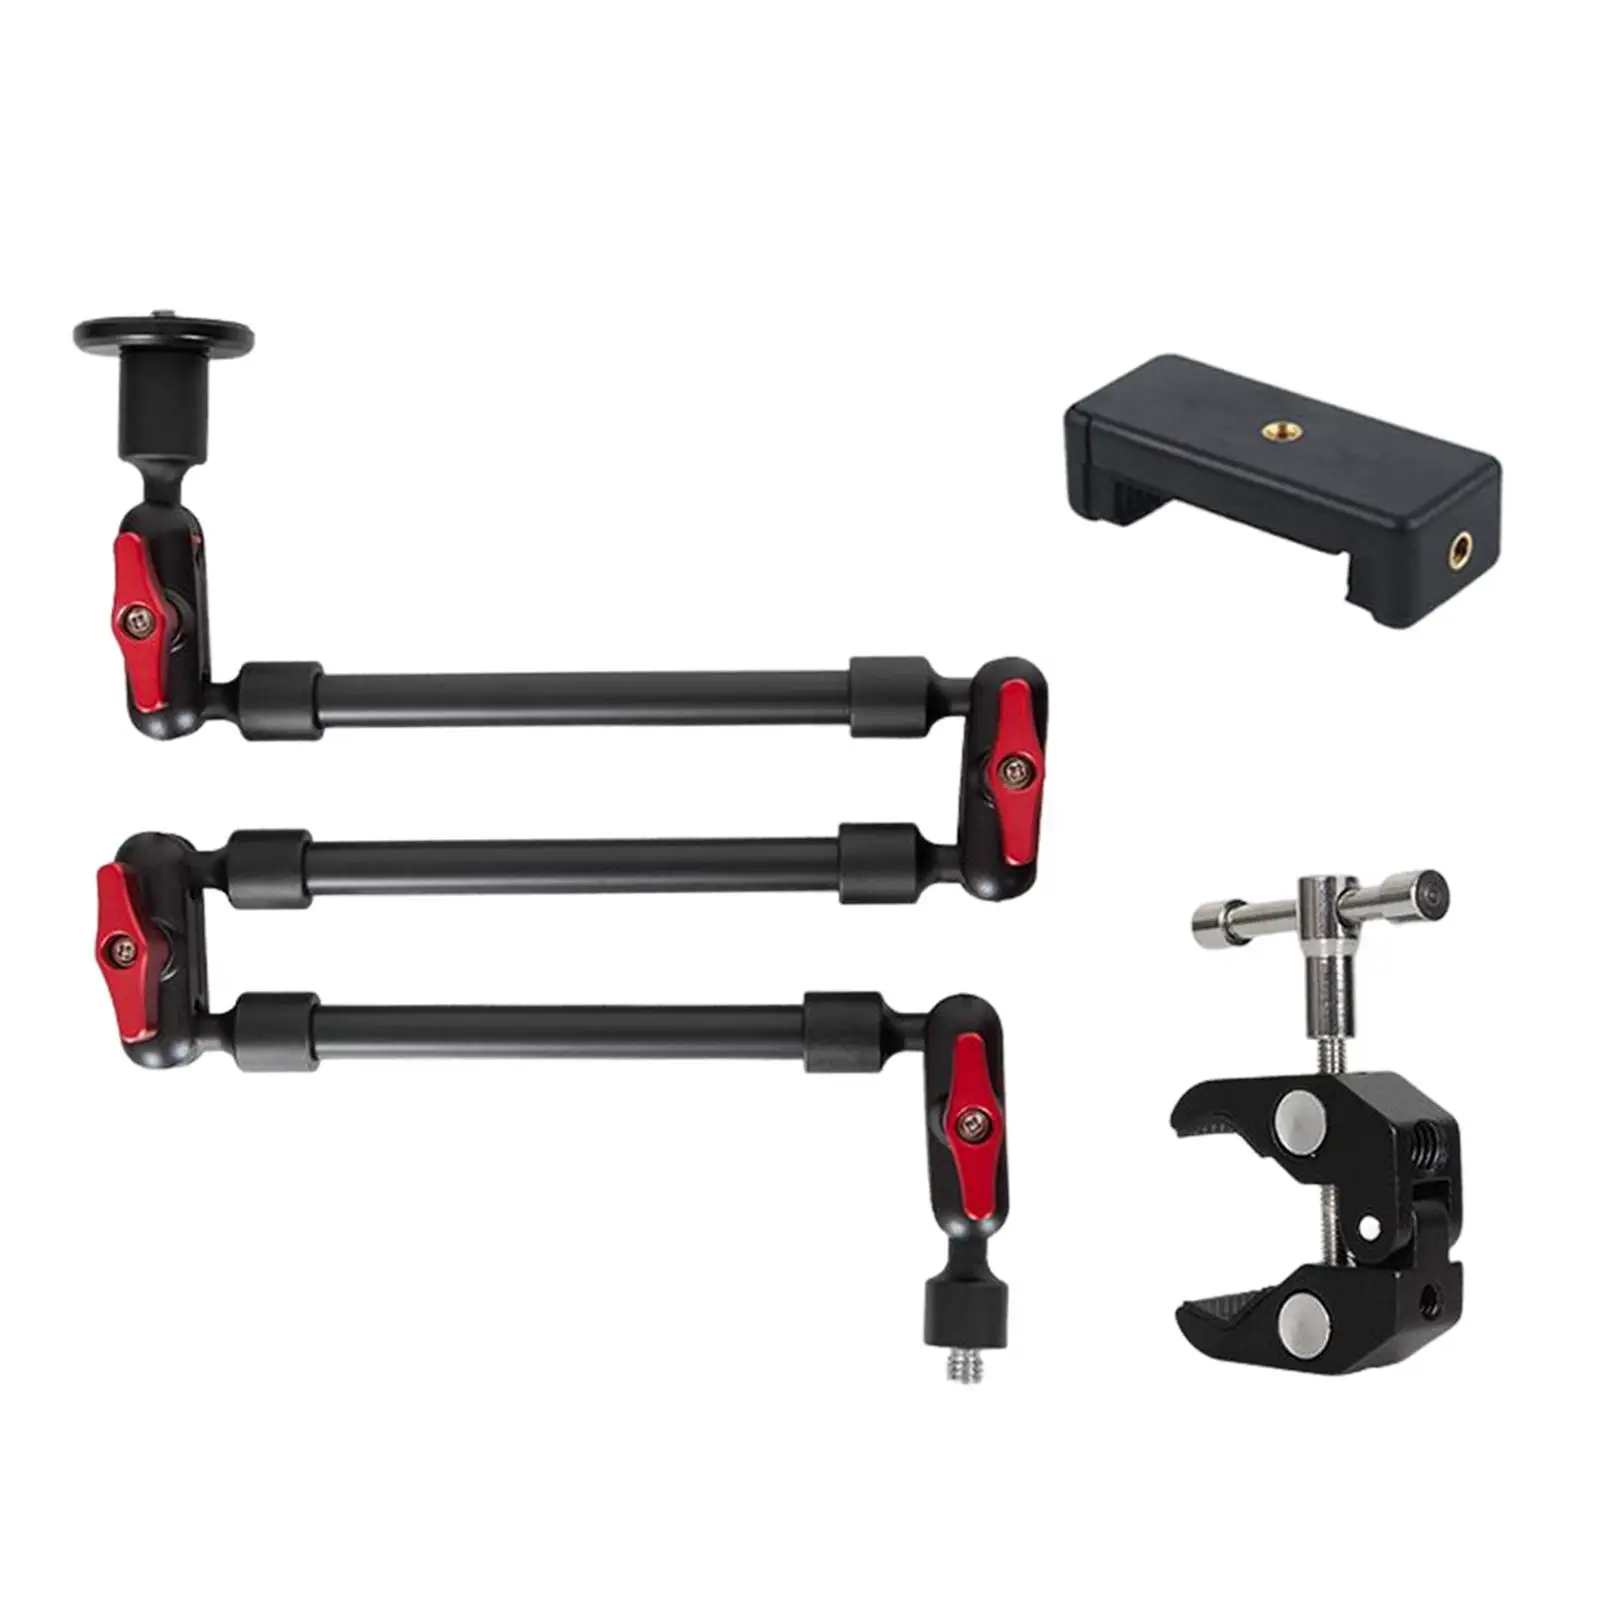 

Flexible Arm Mounts Adjustable Articulating Arm Bracket Magic Friction Arms for action Camera Selfie Photography Videography